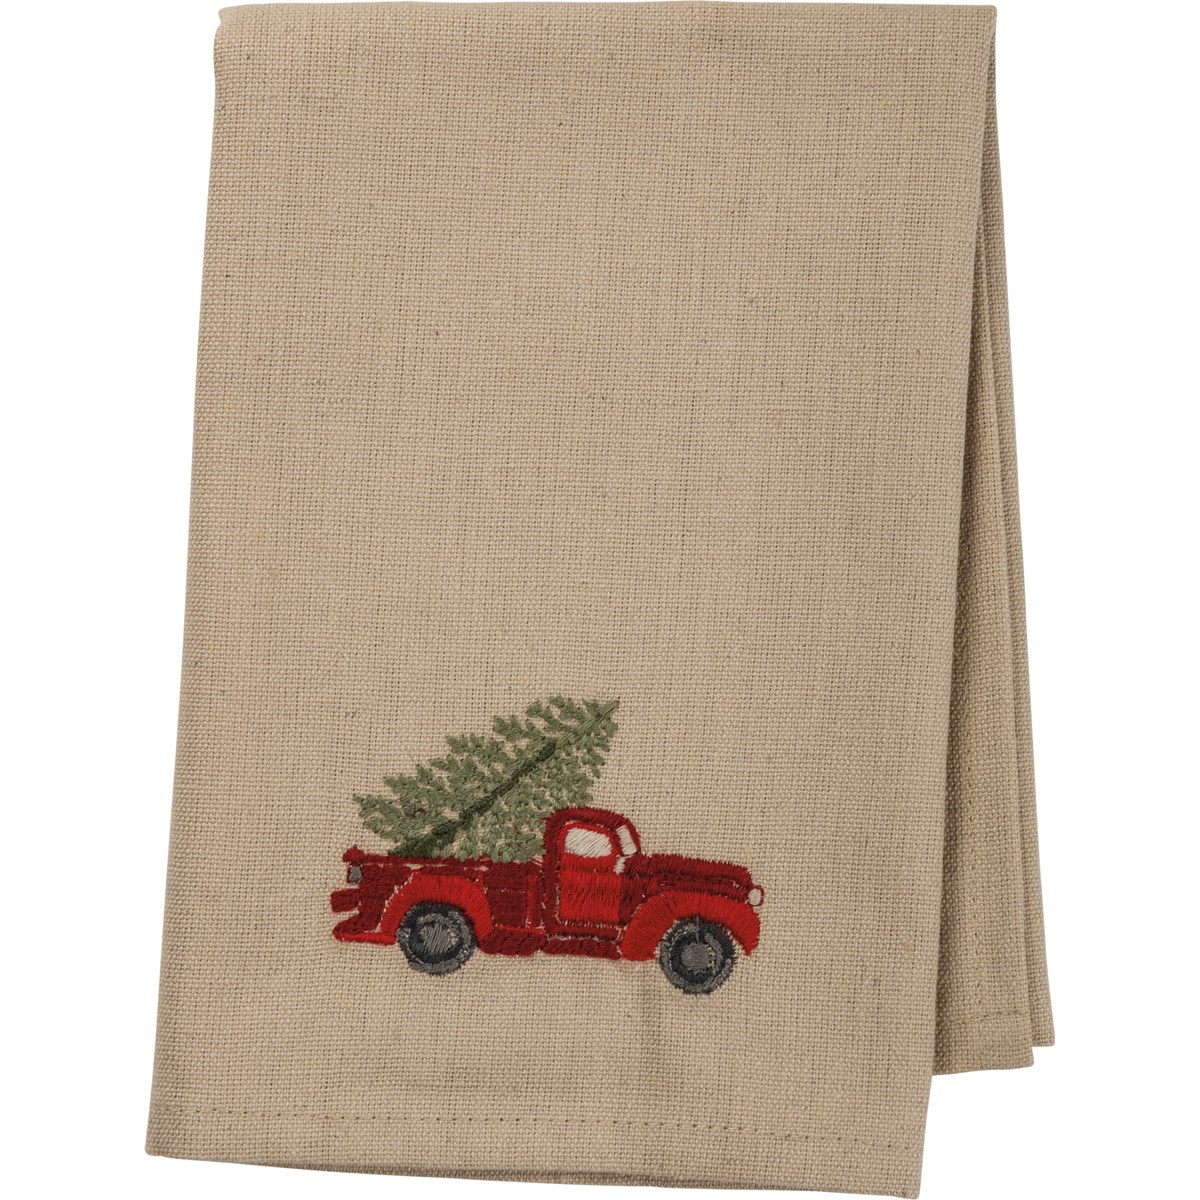 Red Truck With Tree Napkin Set - Cotton, Linen